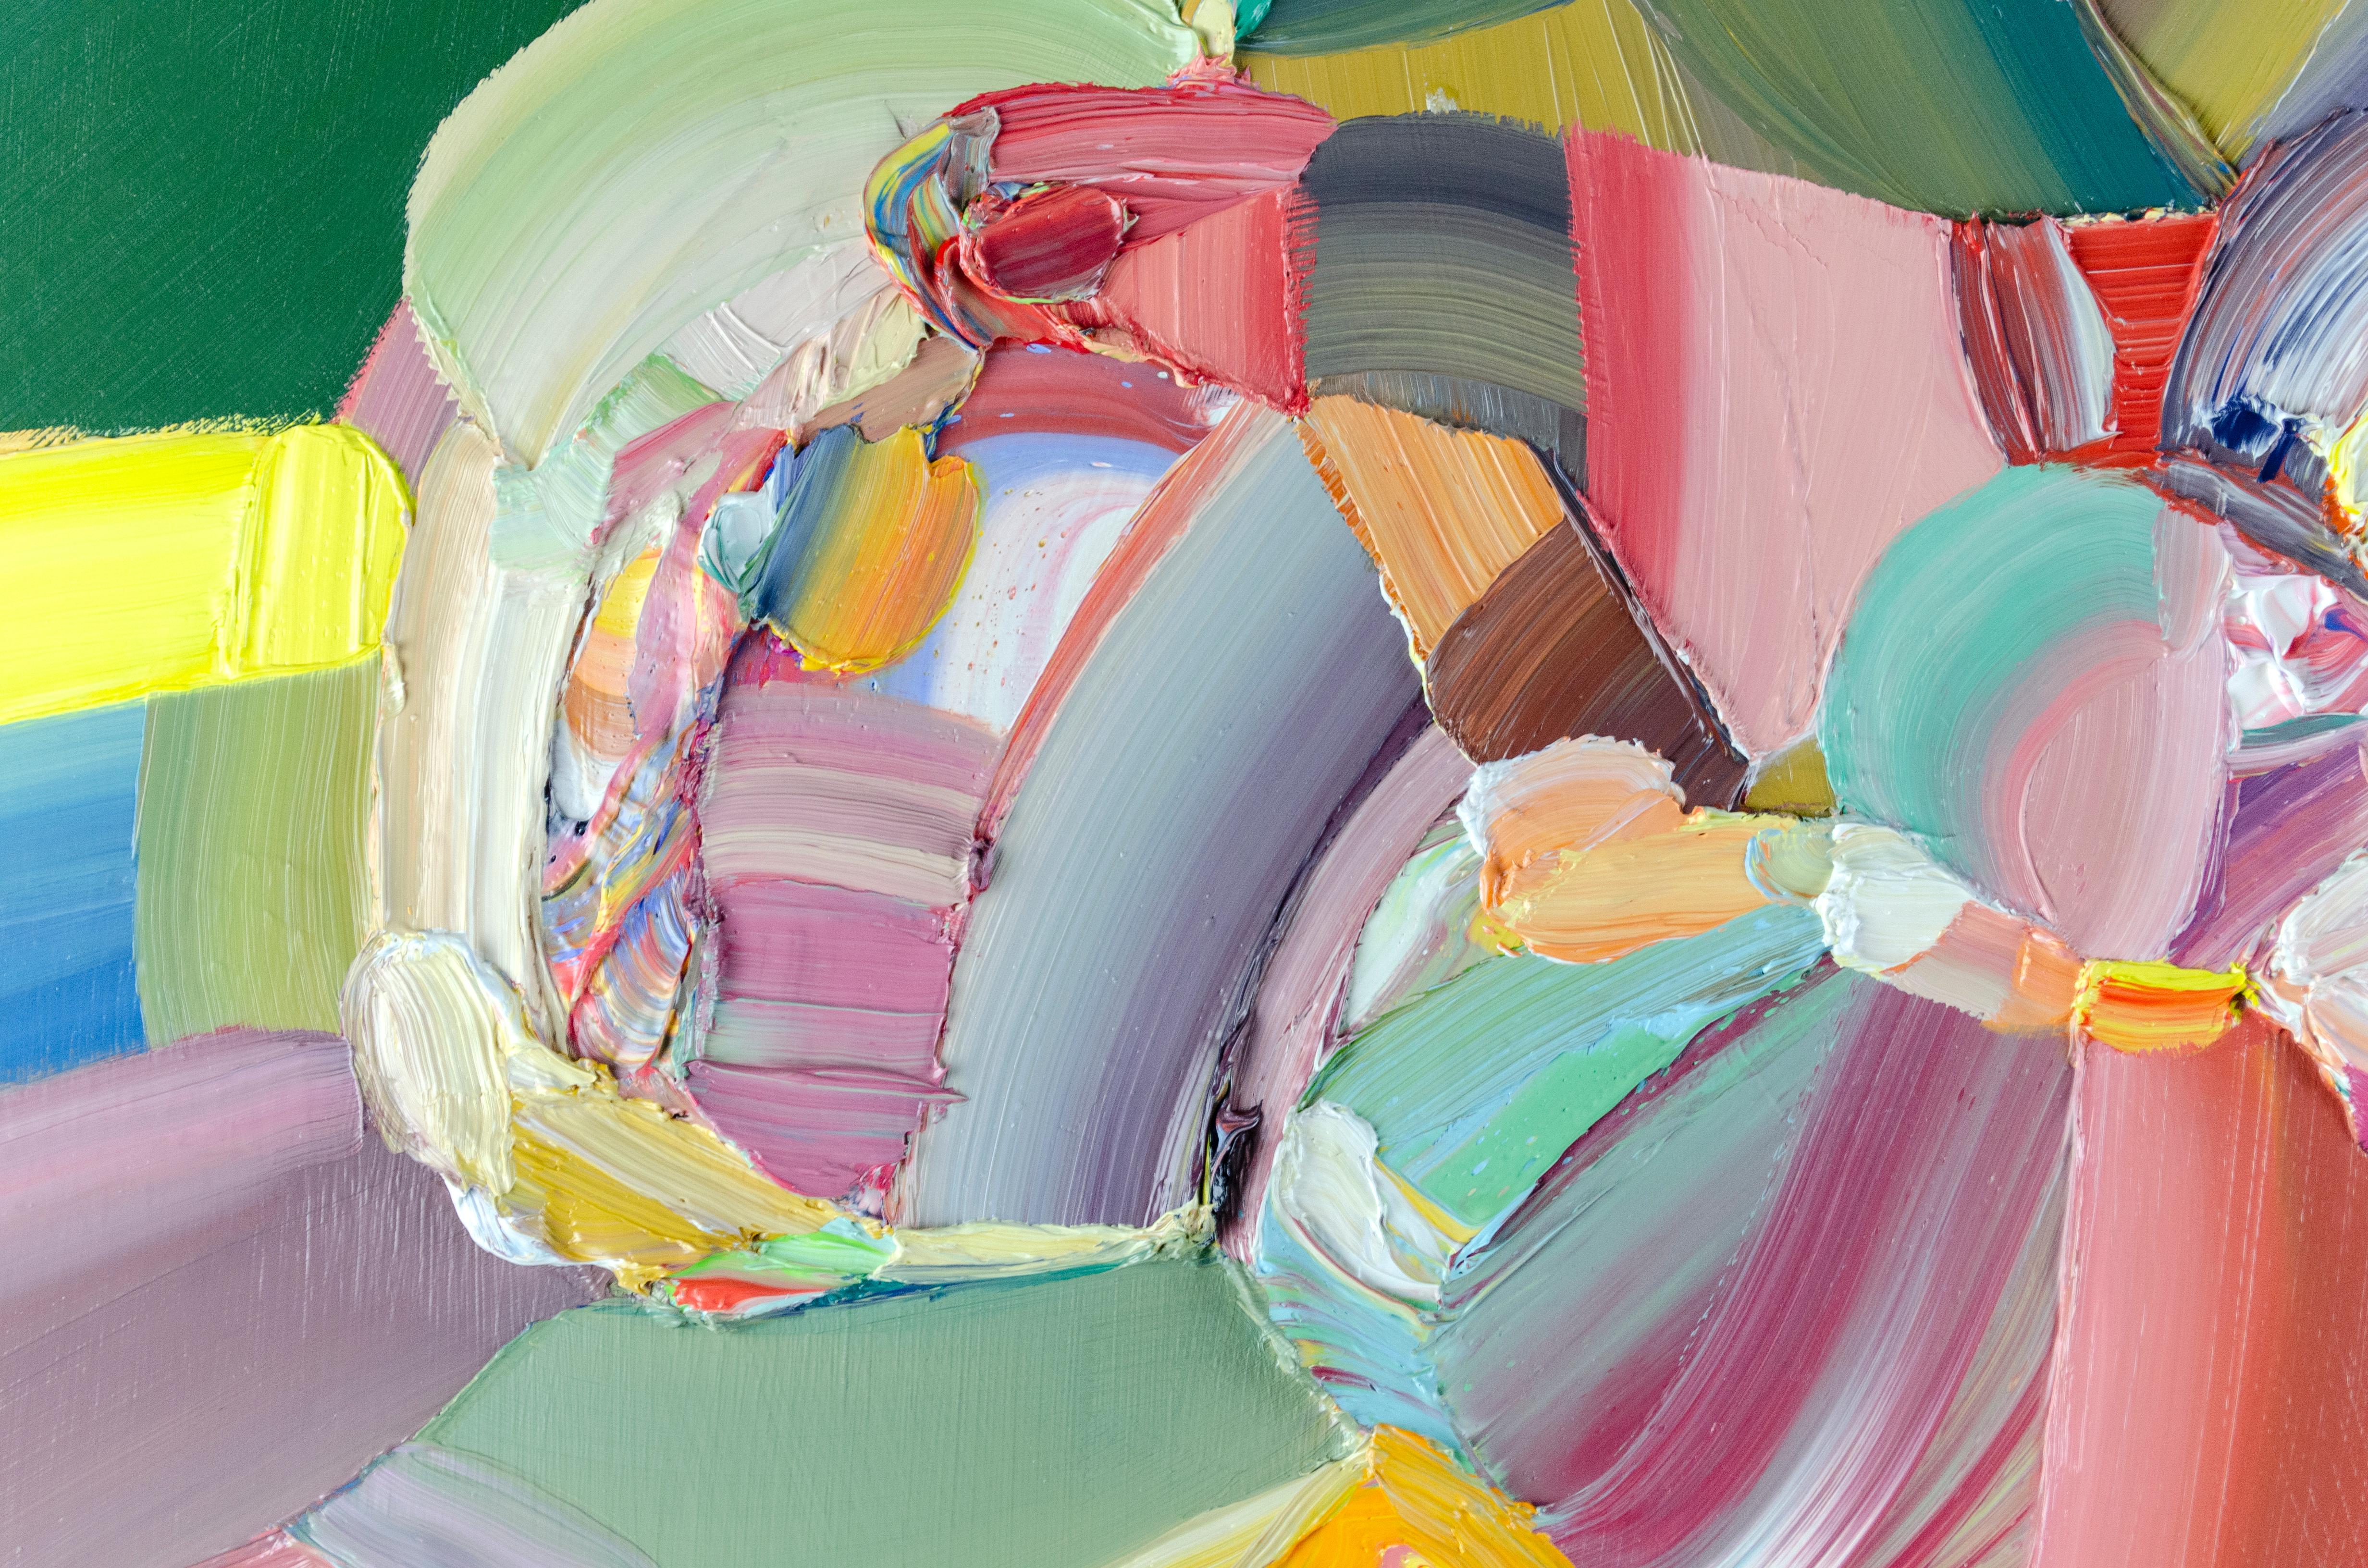 By letting go of representational imagery and leaning into abstraction, Texas- based artist Trey Egan delights in the pure properties of paint. Displaying a wide spectrum of hues with surface variations ranging from smooth to lusciously gooey, his